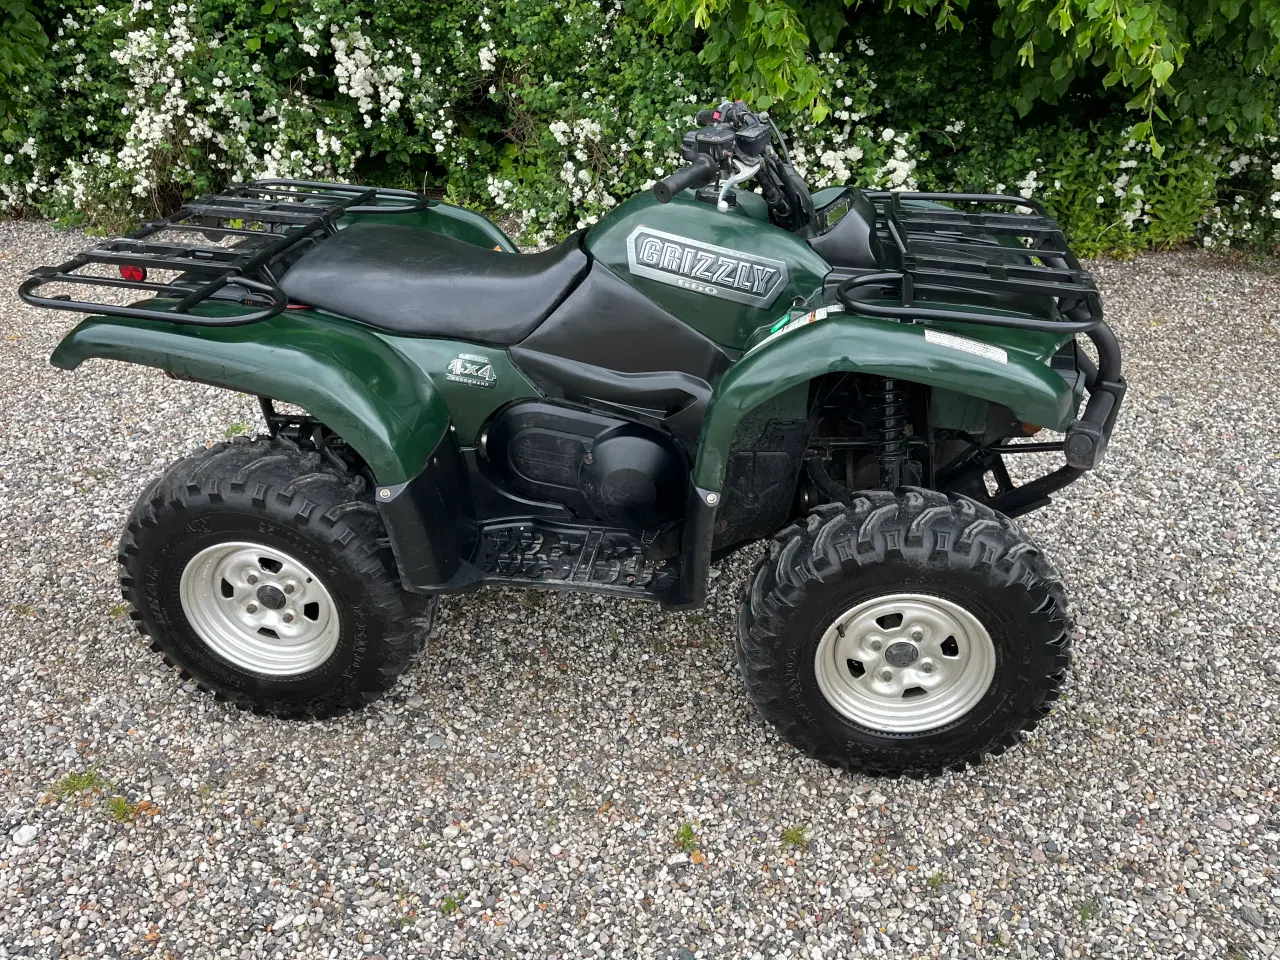 Billede 2 - Yamaha Grizzly 660